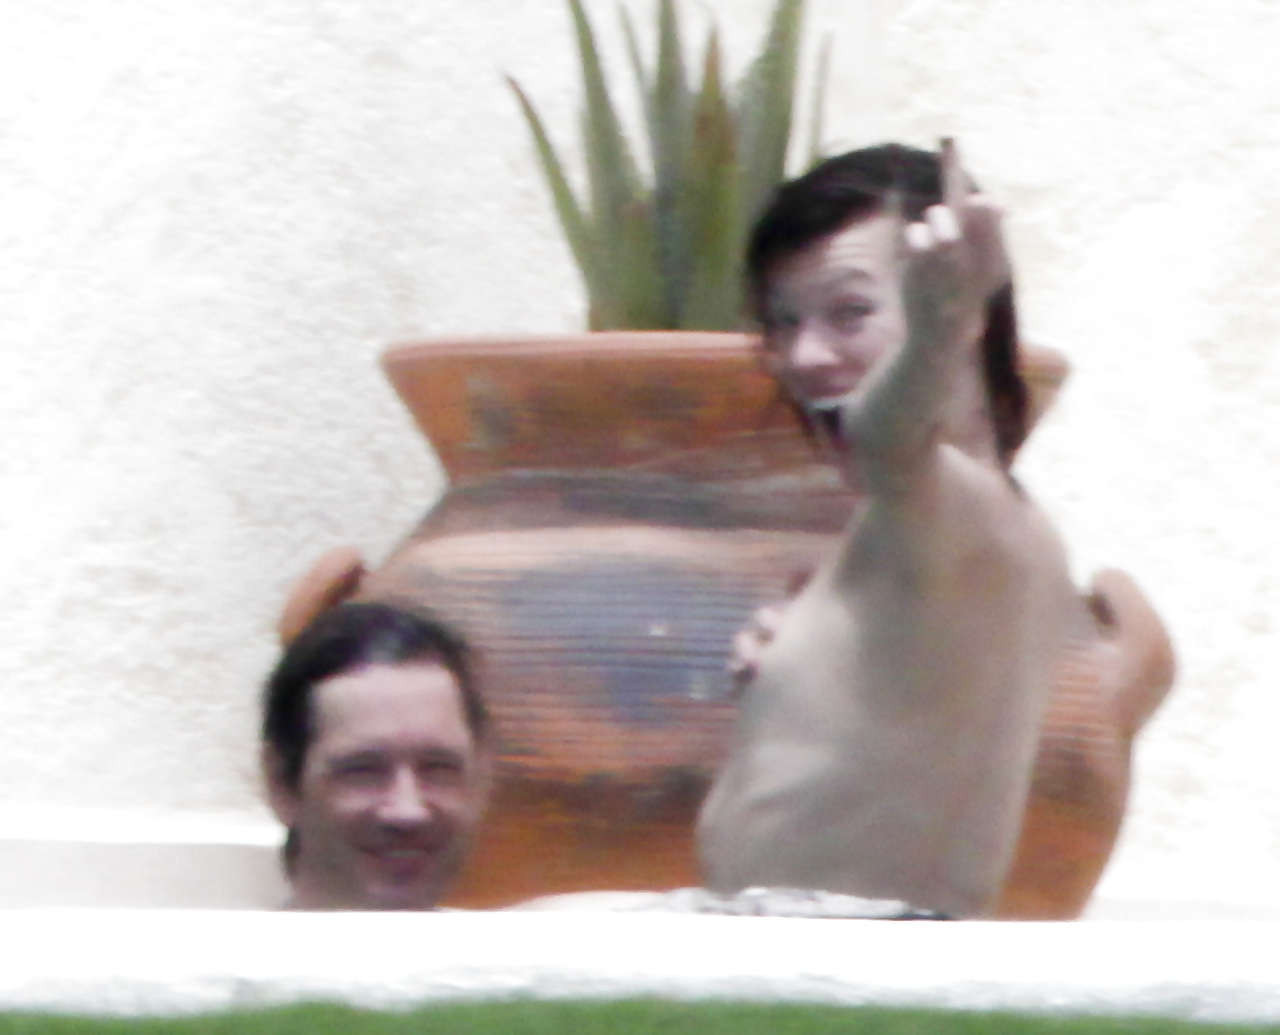 Milla Jovovich caught topless in pool by paparazzi and giving them middle finger #75289838